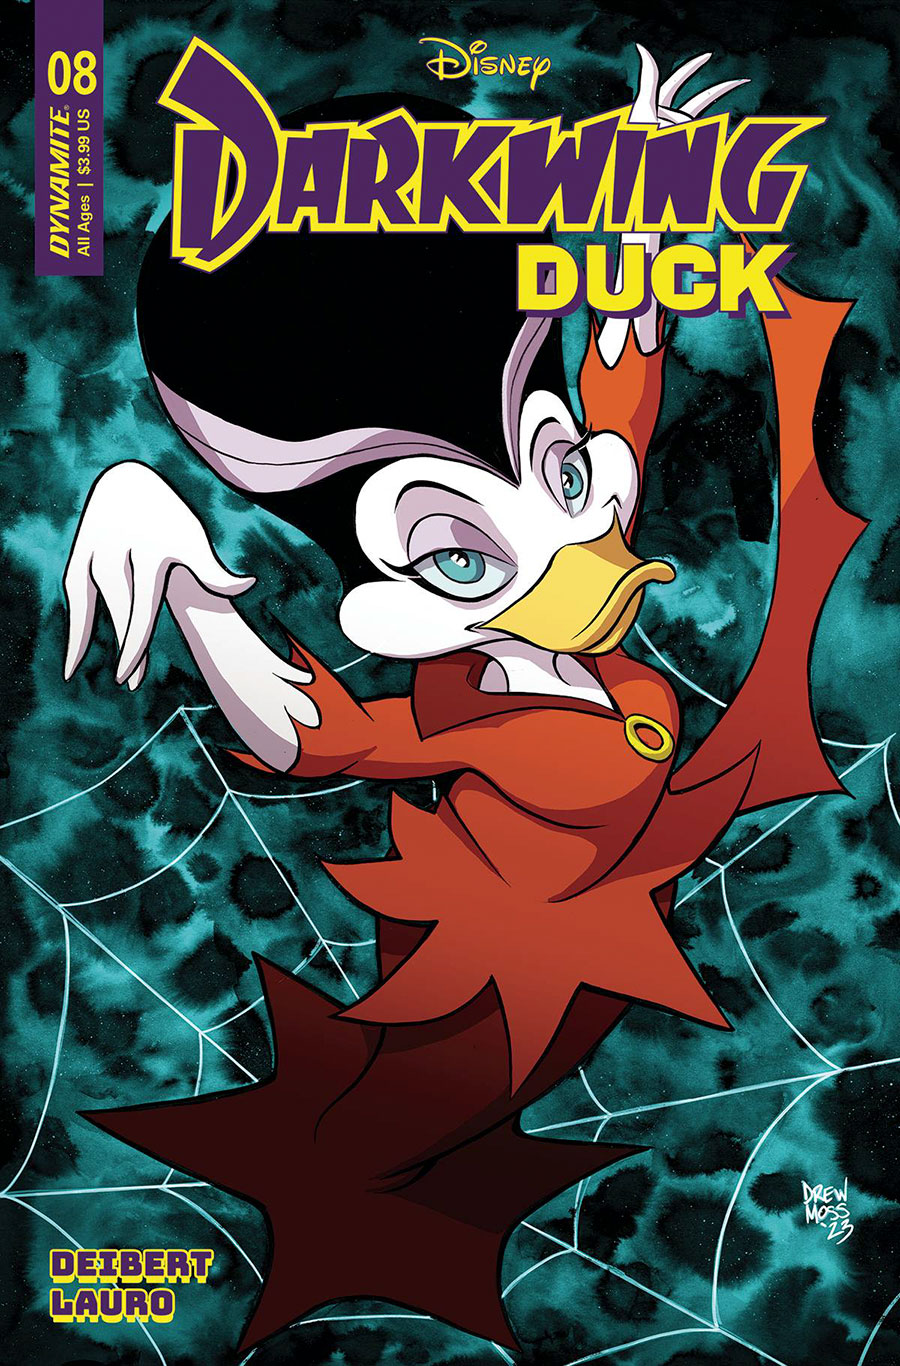 Darkwing Duck Vol 3 #8 Cover C Variant Drew Moss Cover